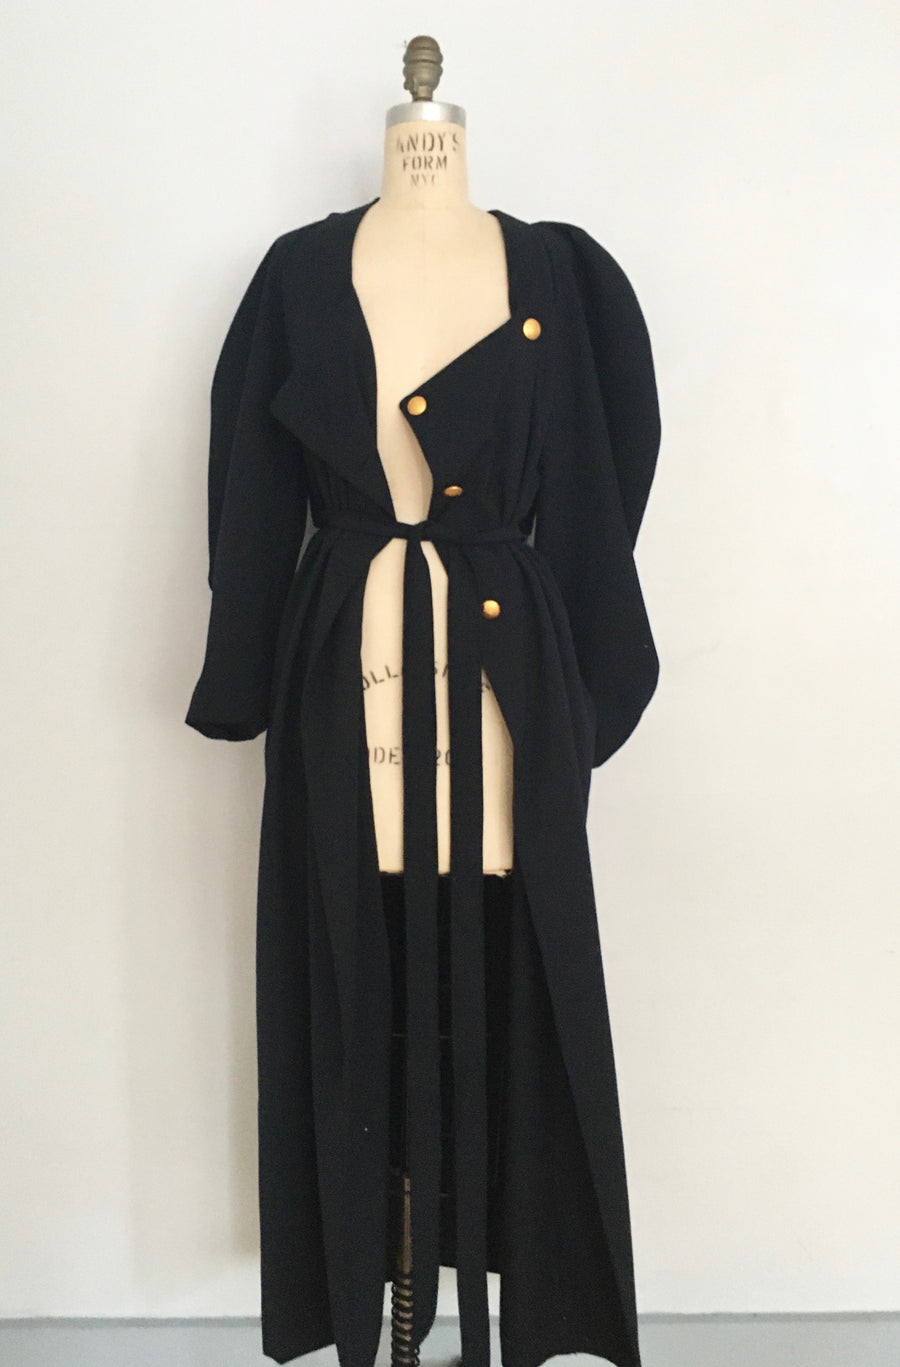 long dress w/ big curved sleeves and gold buttons